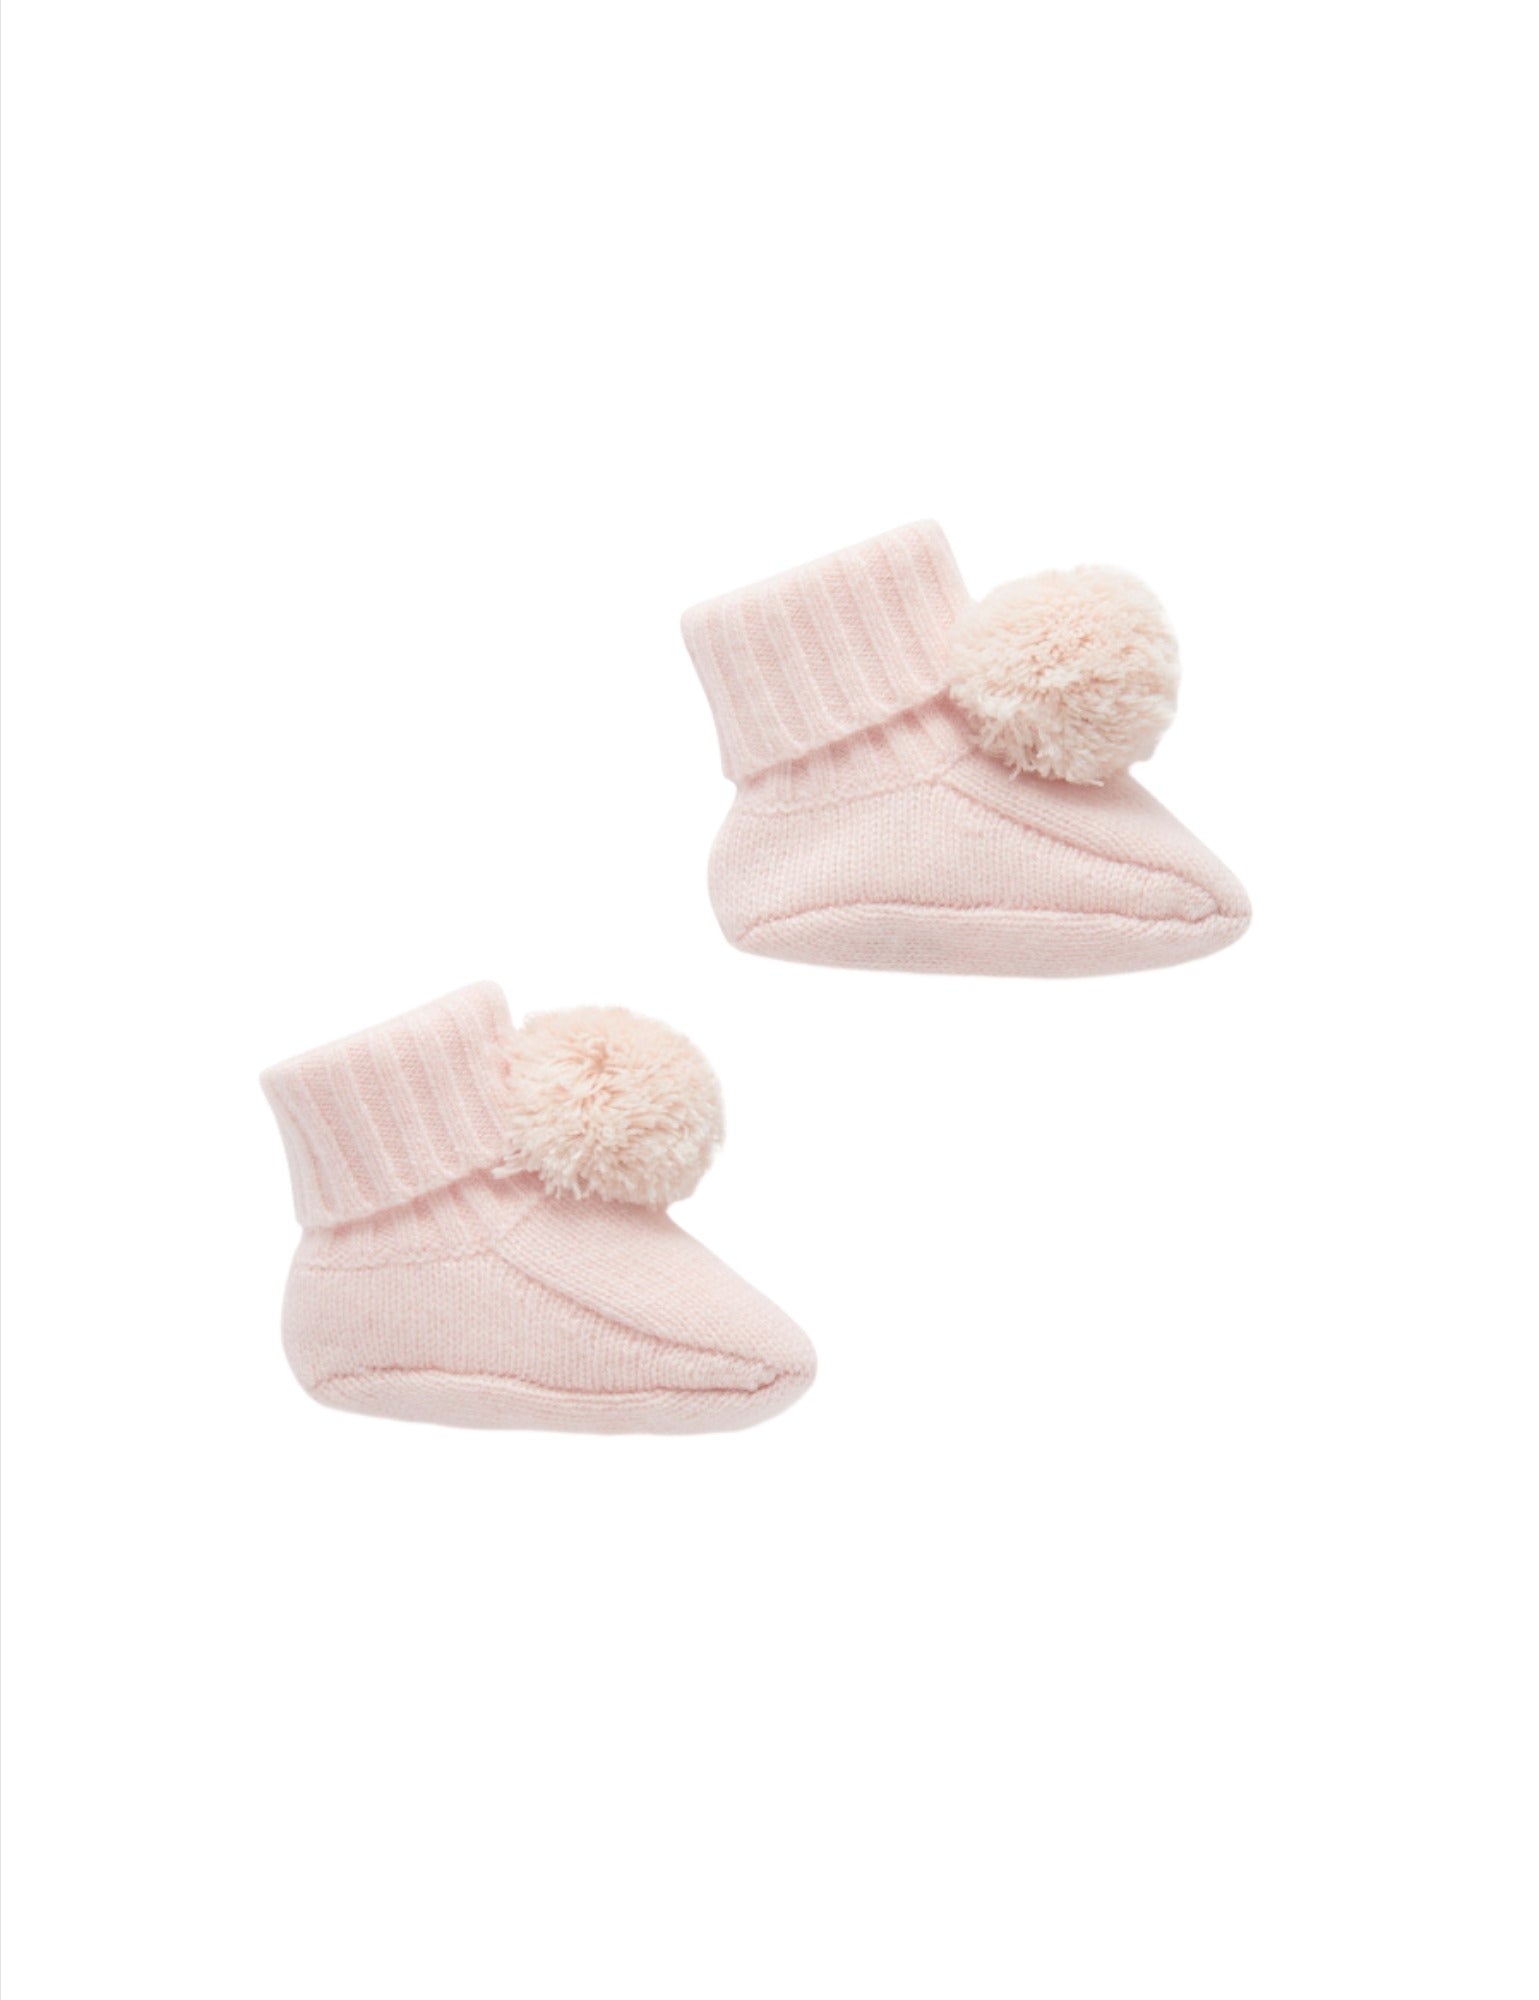 purebaby cashmere booties baby winter clothes